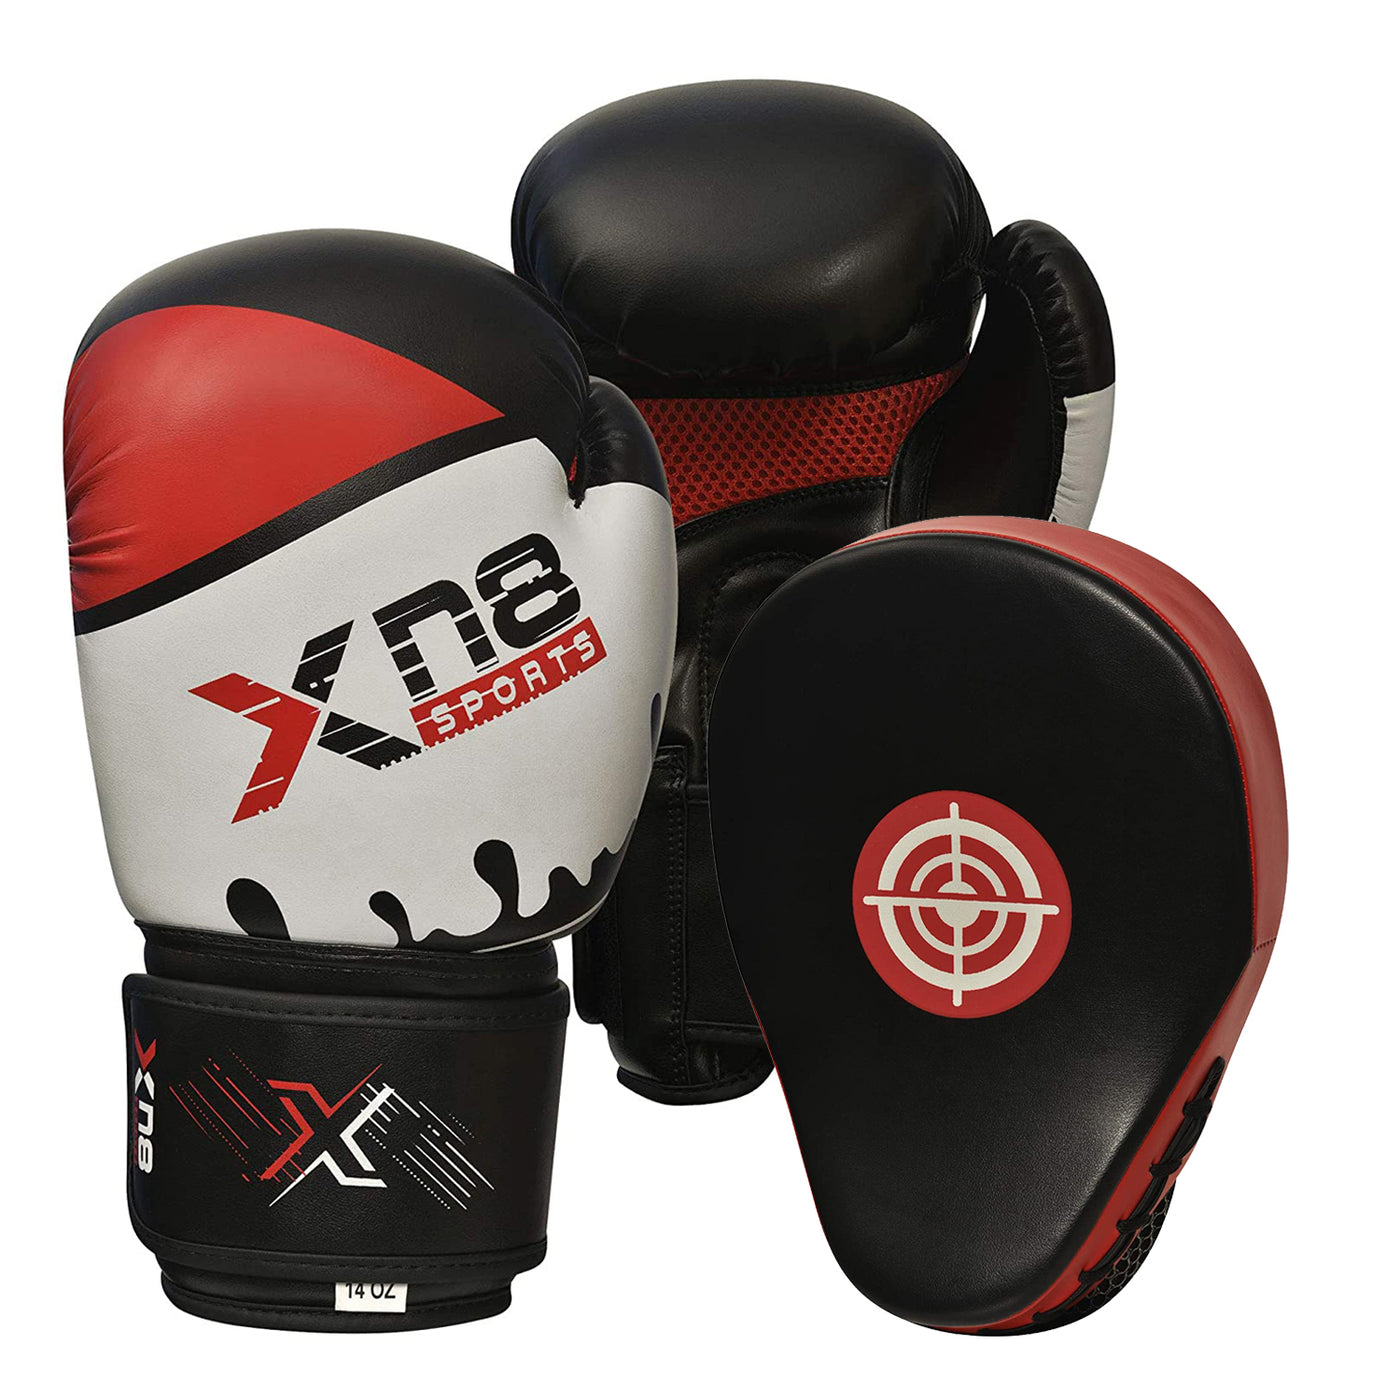 Xn8 Sports Jab Cross Series Gloves and Focus Pads